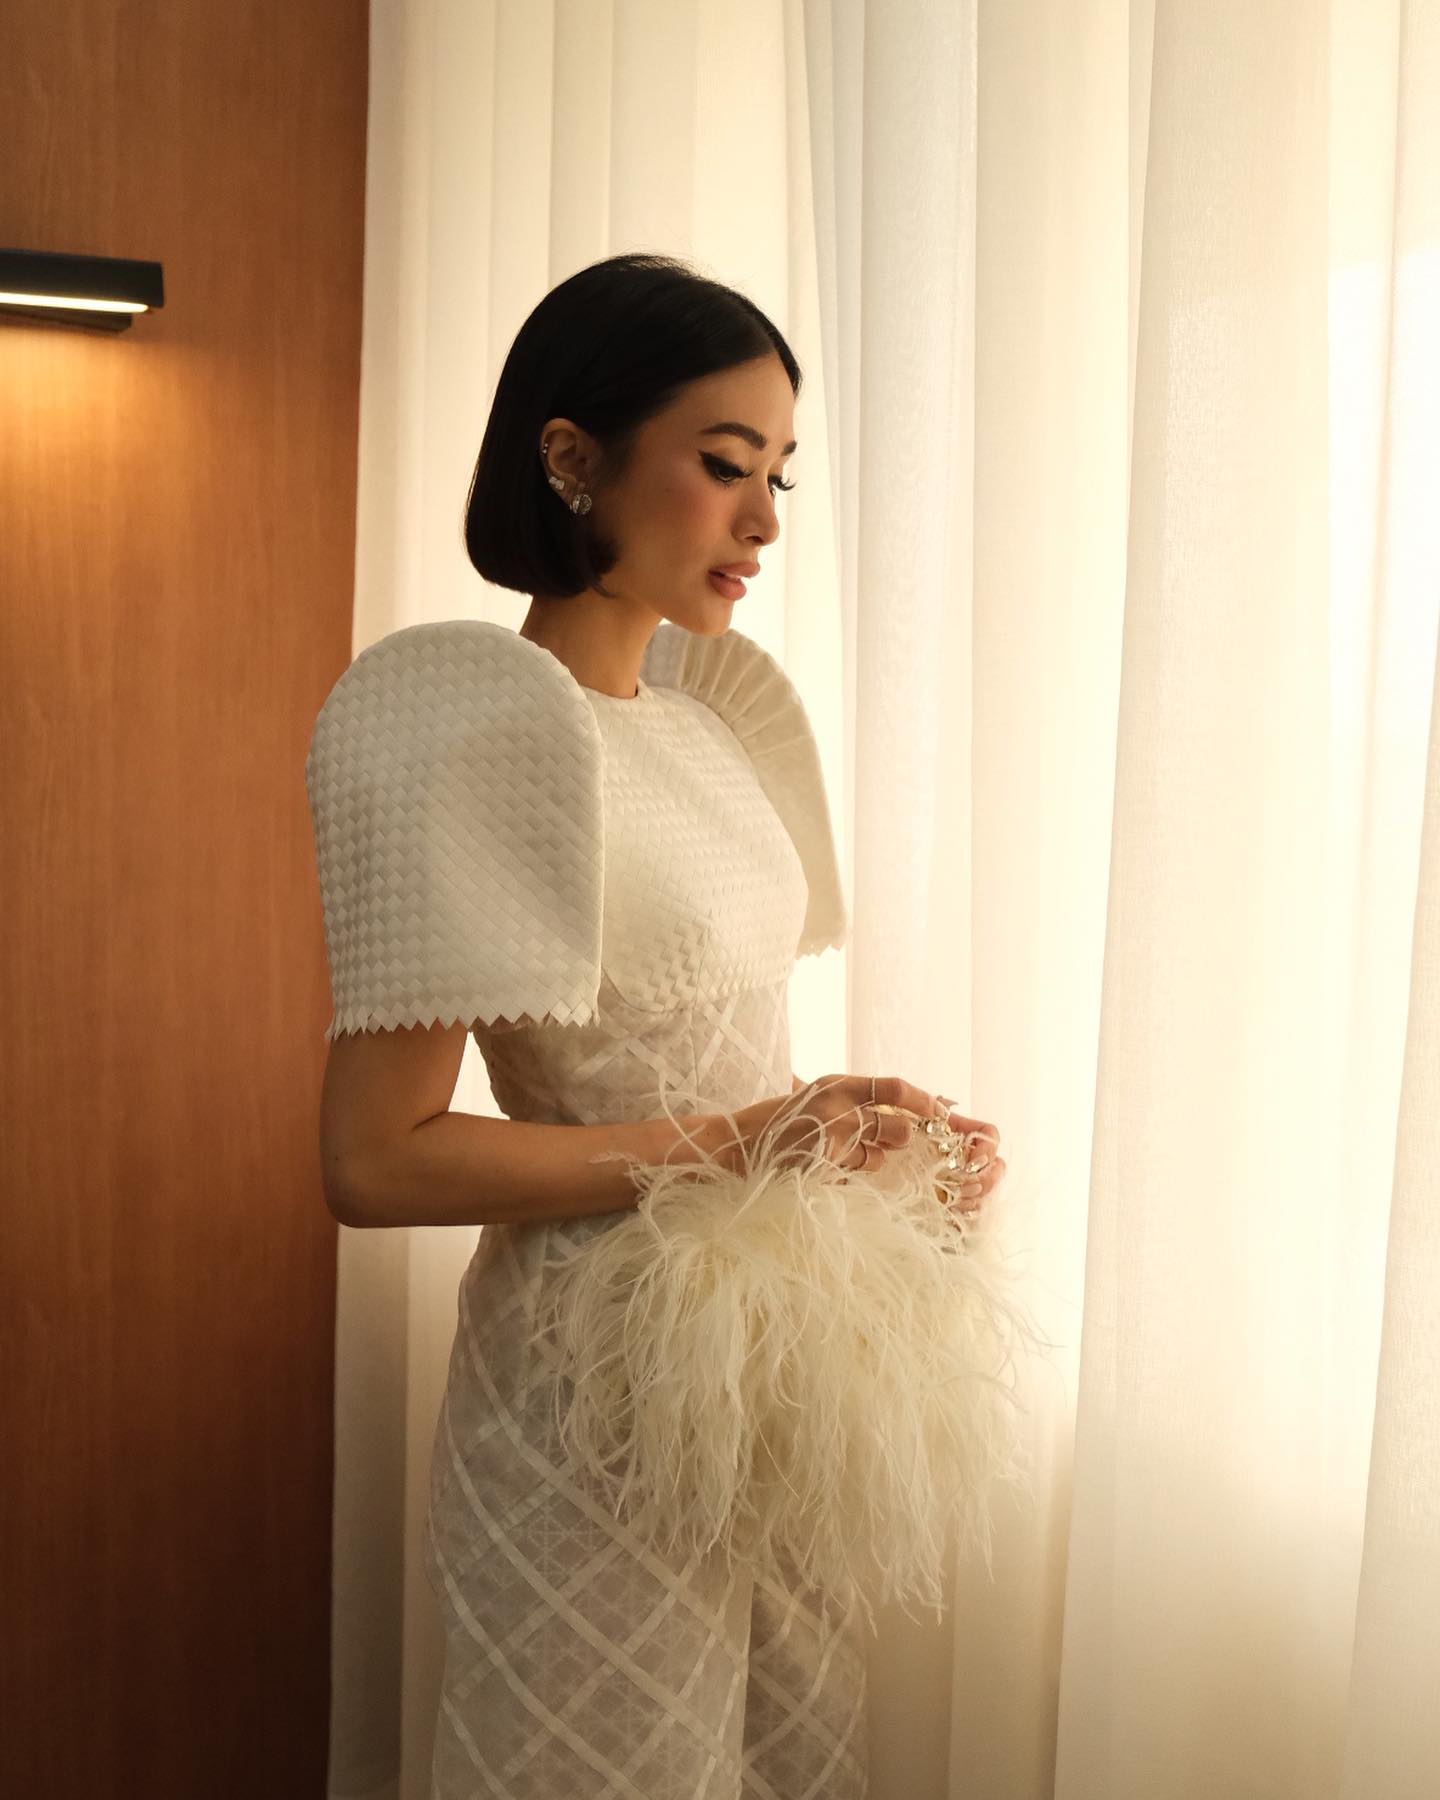 IN PHOTOS: Heart Evangelista's exquisite outfits at the Paris Fashion Week